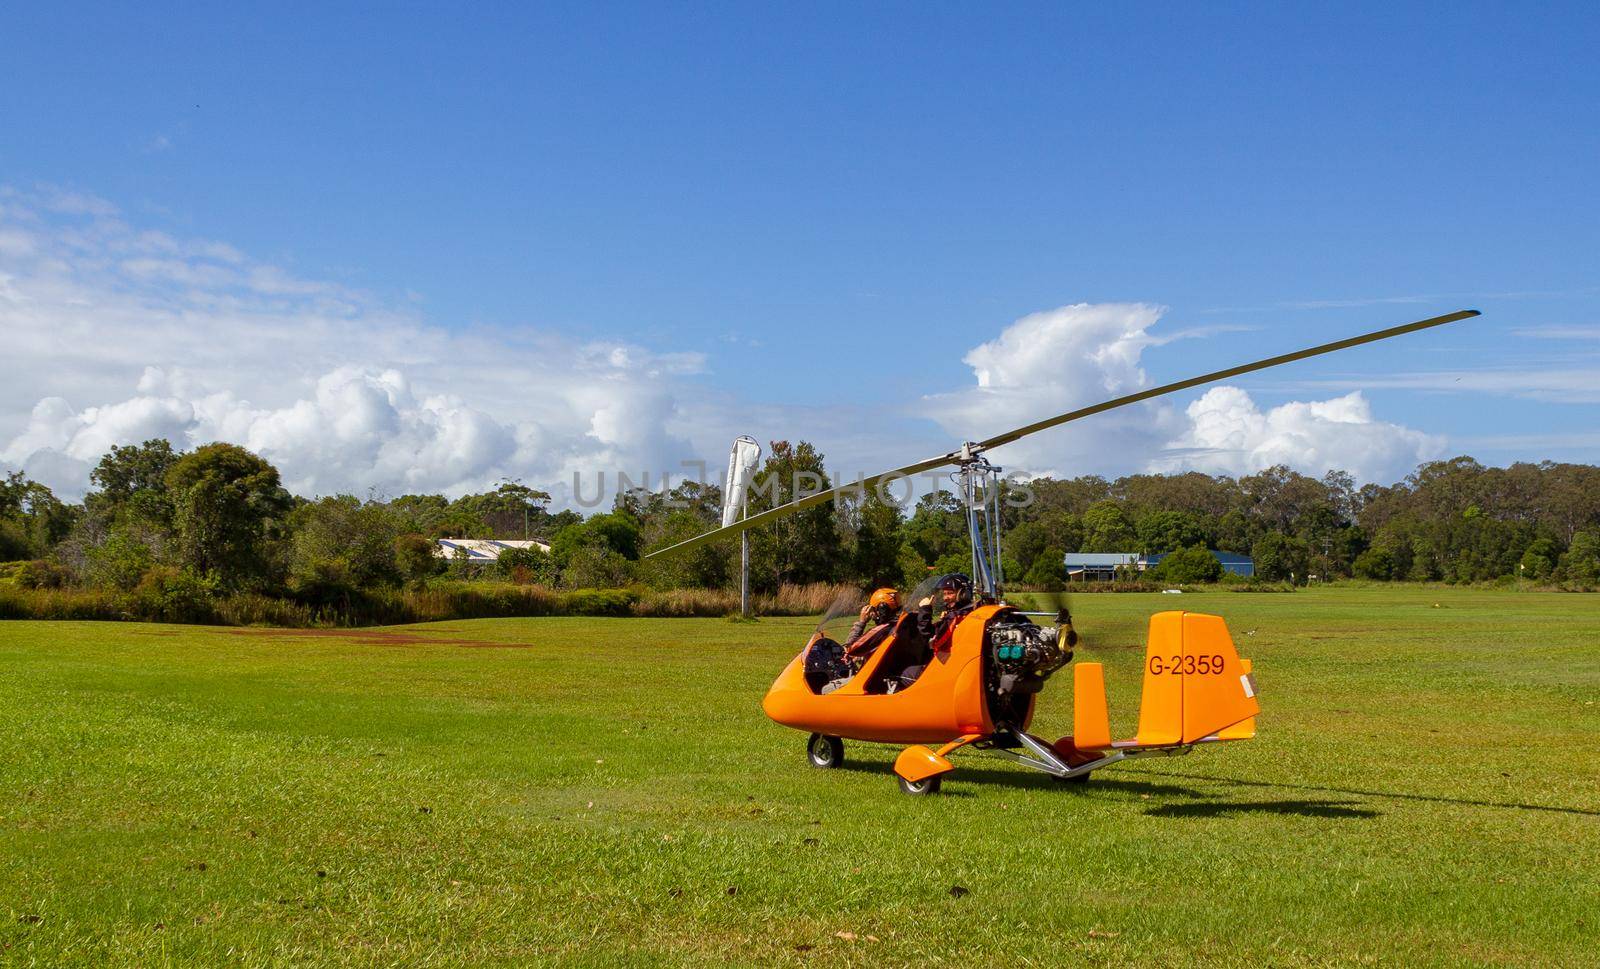 Takeoff of a gyrocopter on an grass airfield in Bayron Bay, Queensland